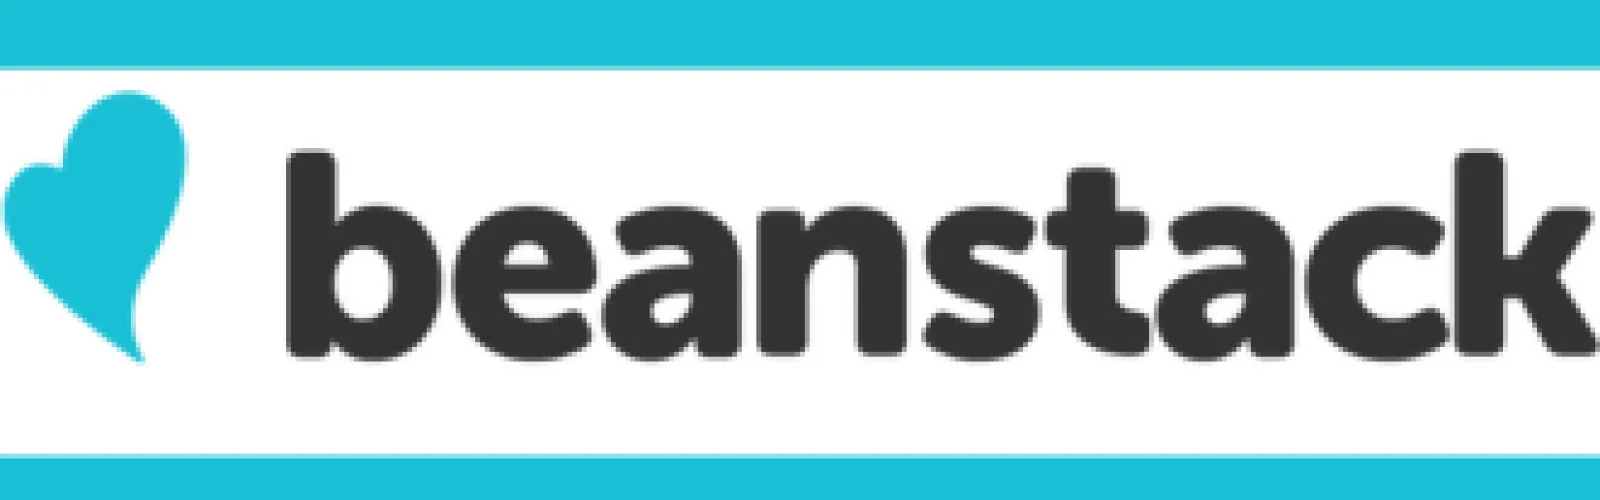 Beanstack logo with a blue heart icon and black text on a white background, surrounded by a blue border